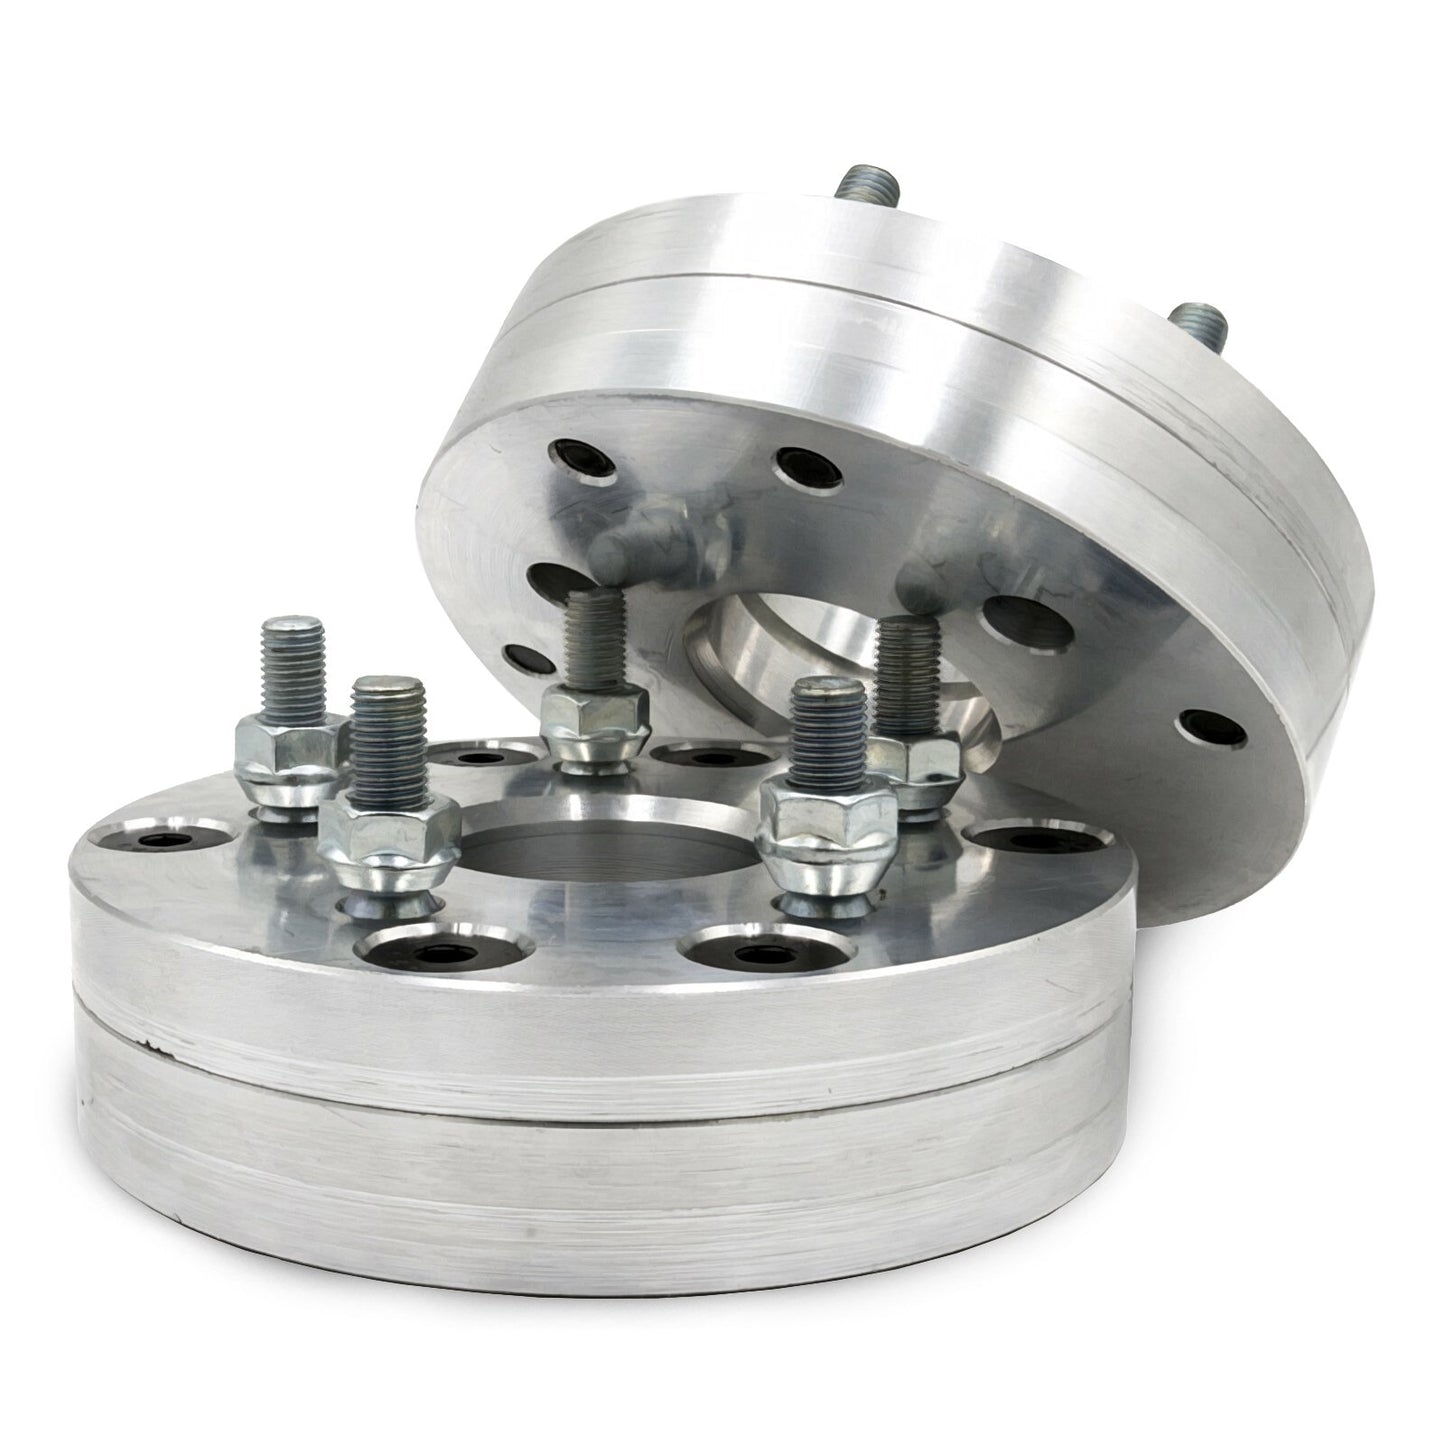 4x110 to 5x120 2 piece Wheel Adapter - Thickness: 1.5" - 3"